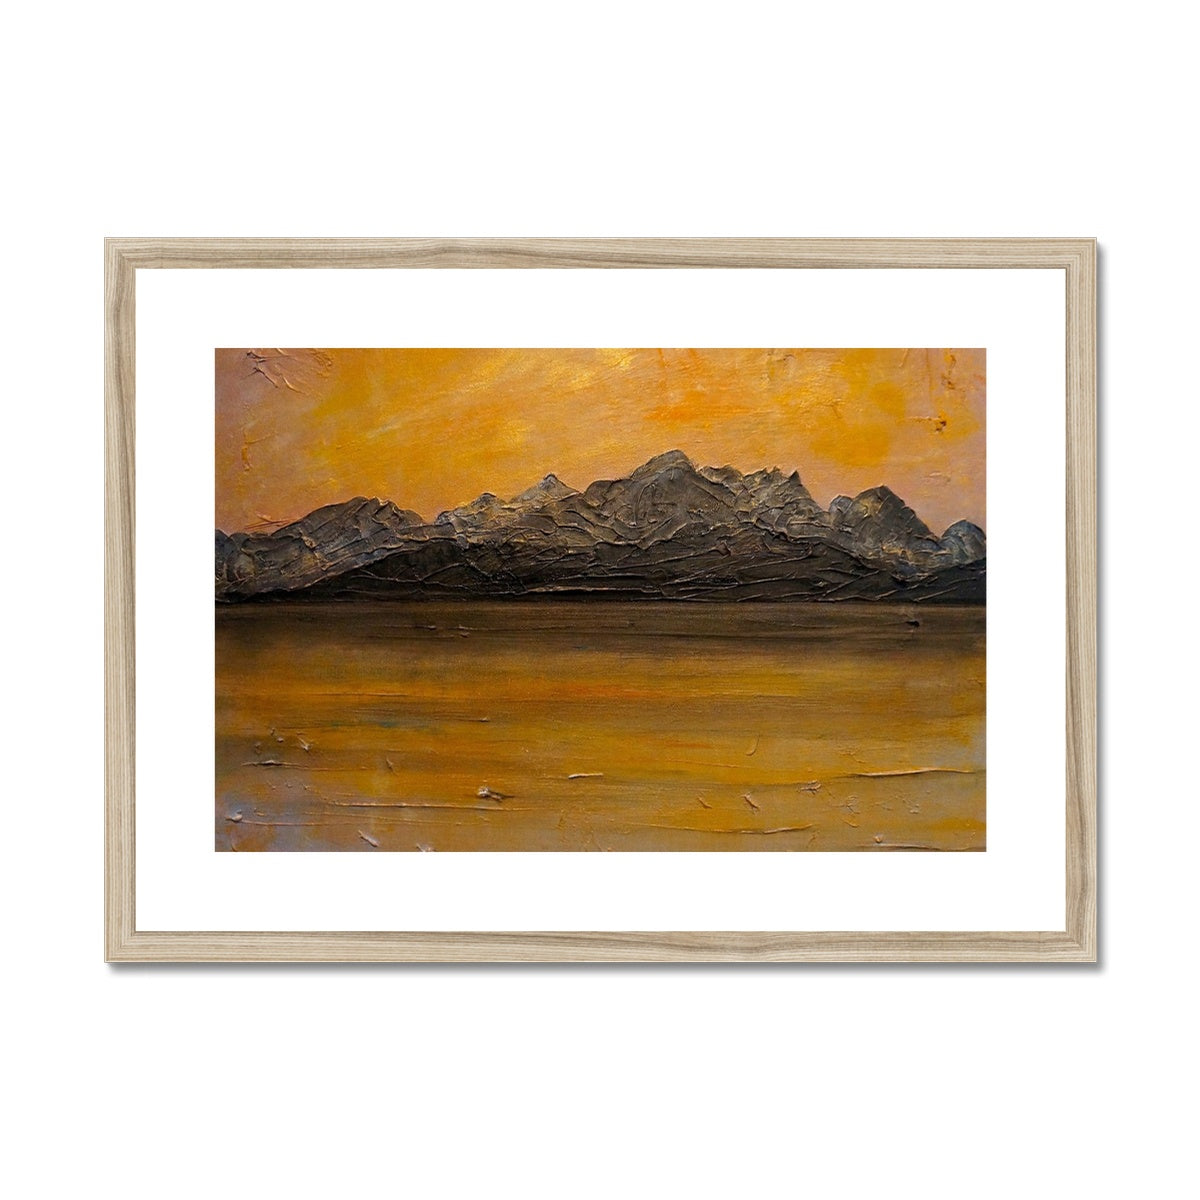 Cuillin Sunset Skye Painting | Framed & Mounted Prints From Scotland-Framed & Mounted Prints-Skye Art Gallery-A2 Landscape-Natural Frame-Paintings, Prints, Homeware, Art Gifts From Scotland By Scottish Artist Kevin Hunter